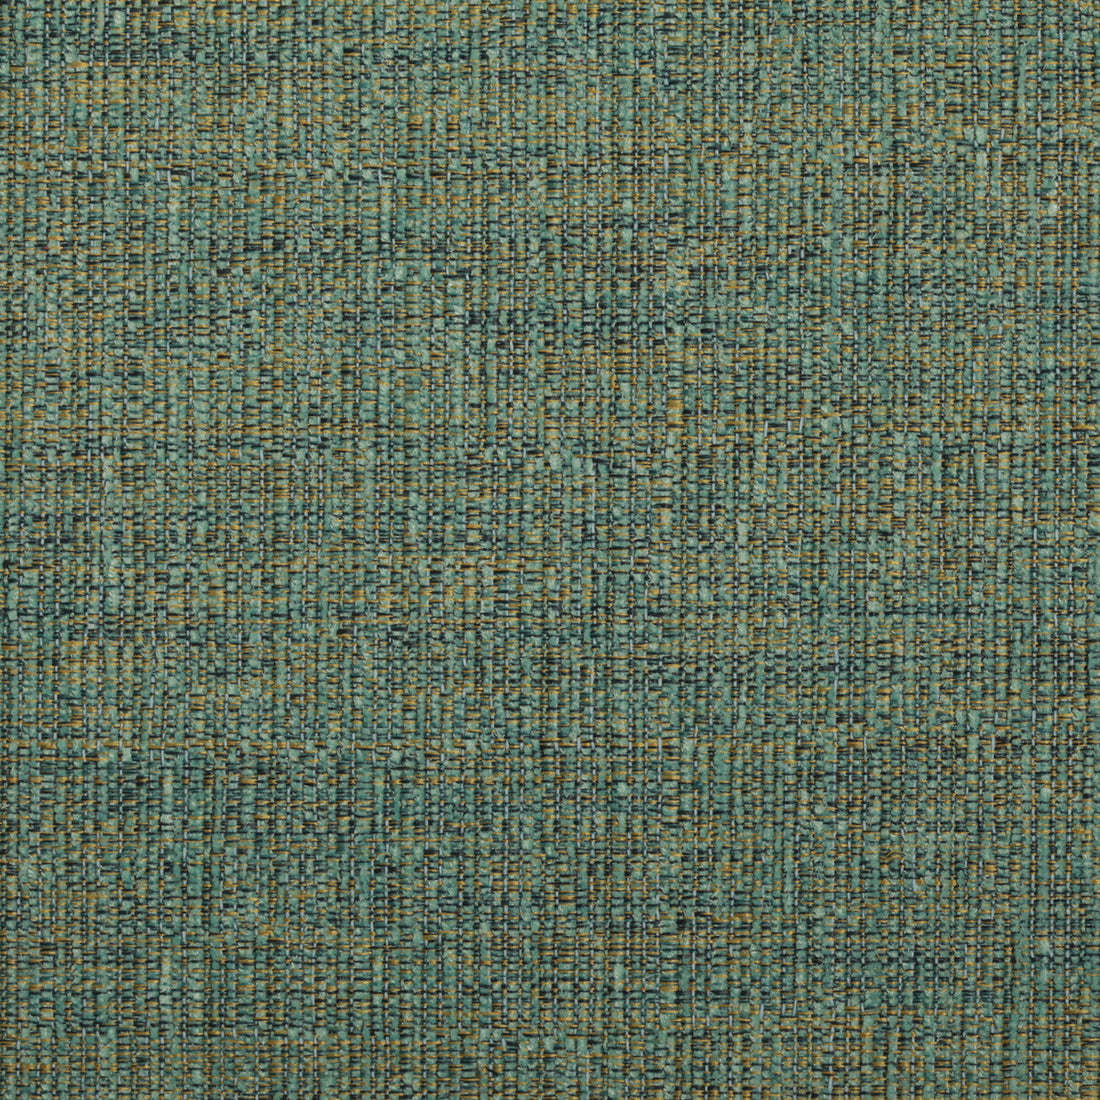 Kravet Smart fabric in 35127-135 color - pattern 35127.135.0 - by Kravet Smart in the Performance Crypton Home collection